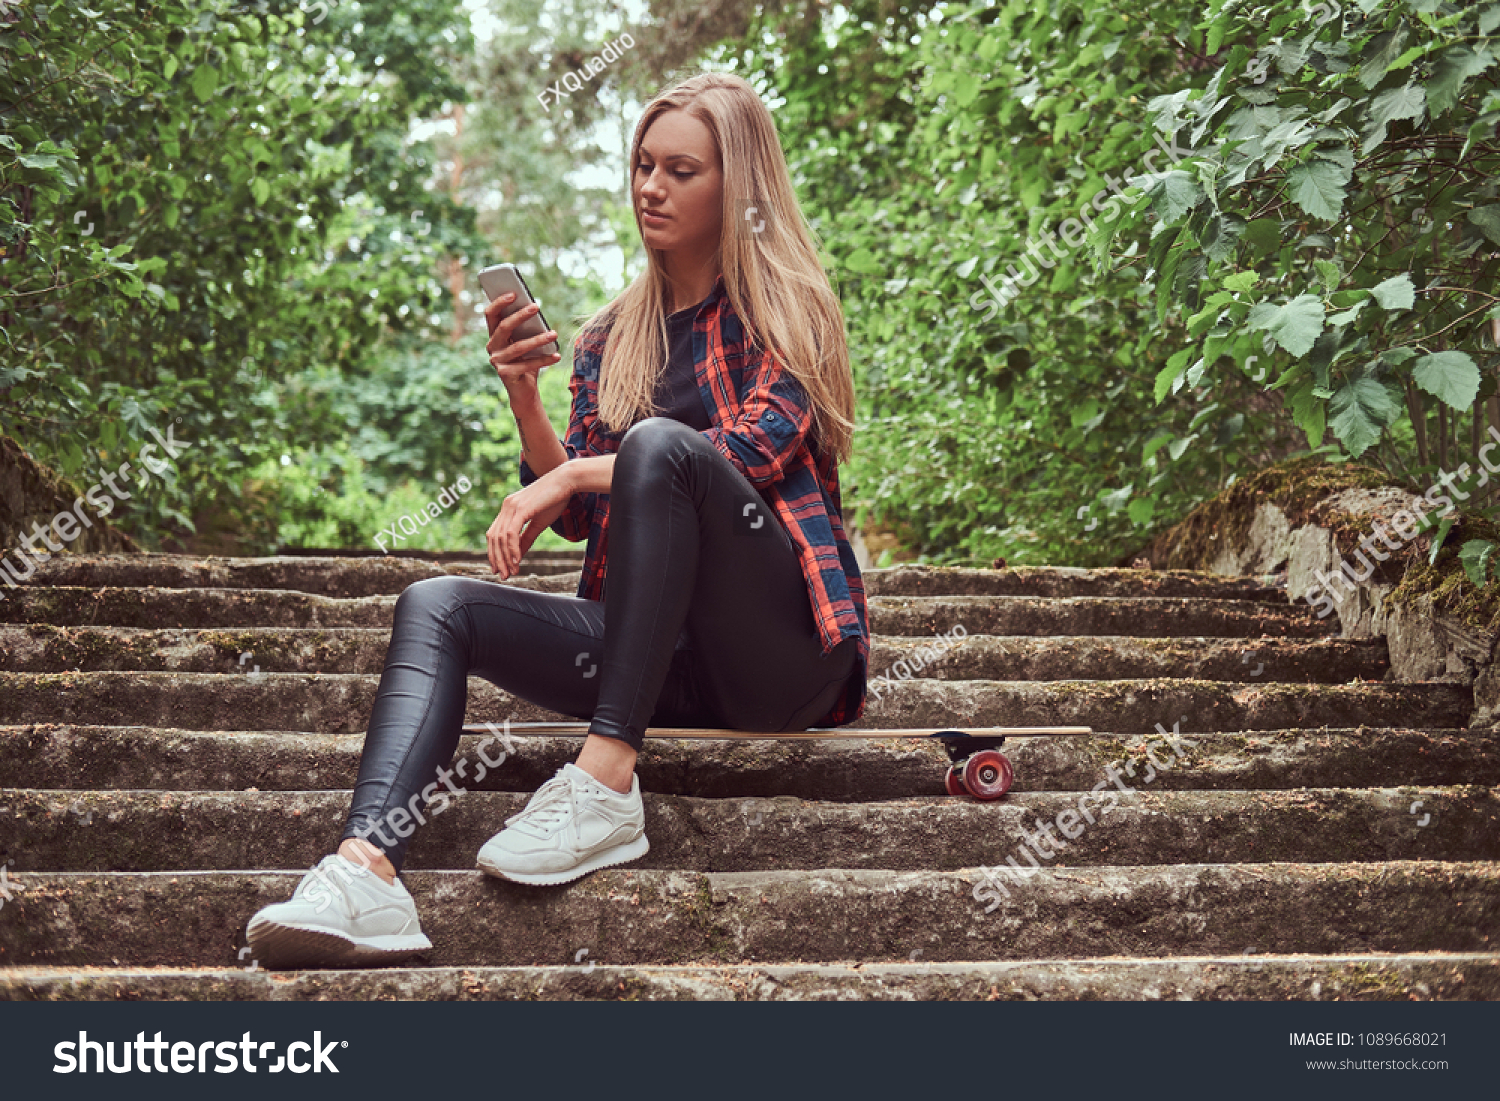 Young blonde hipster girl using a smartphone while sitting on steps in a park. #1089668021